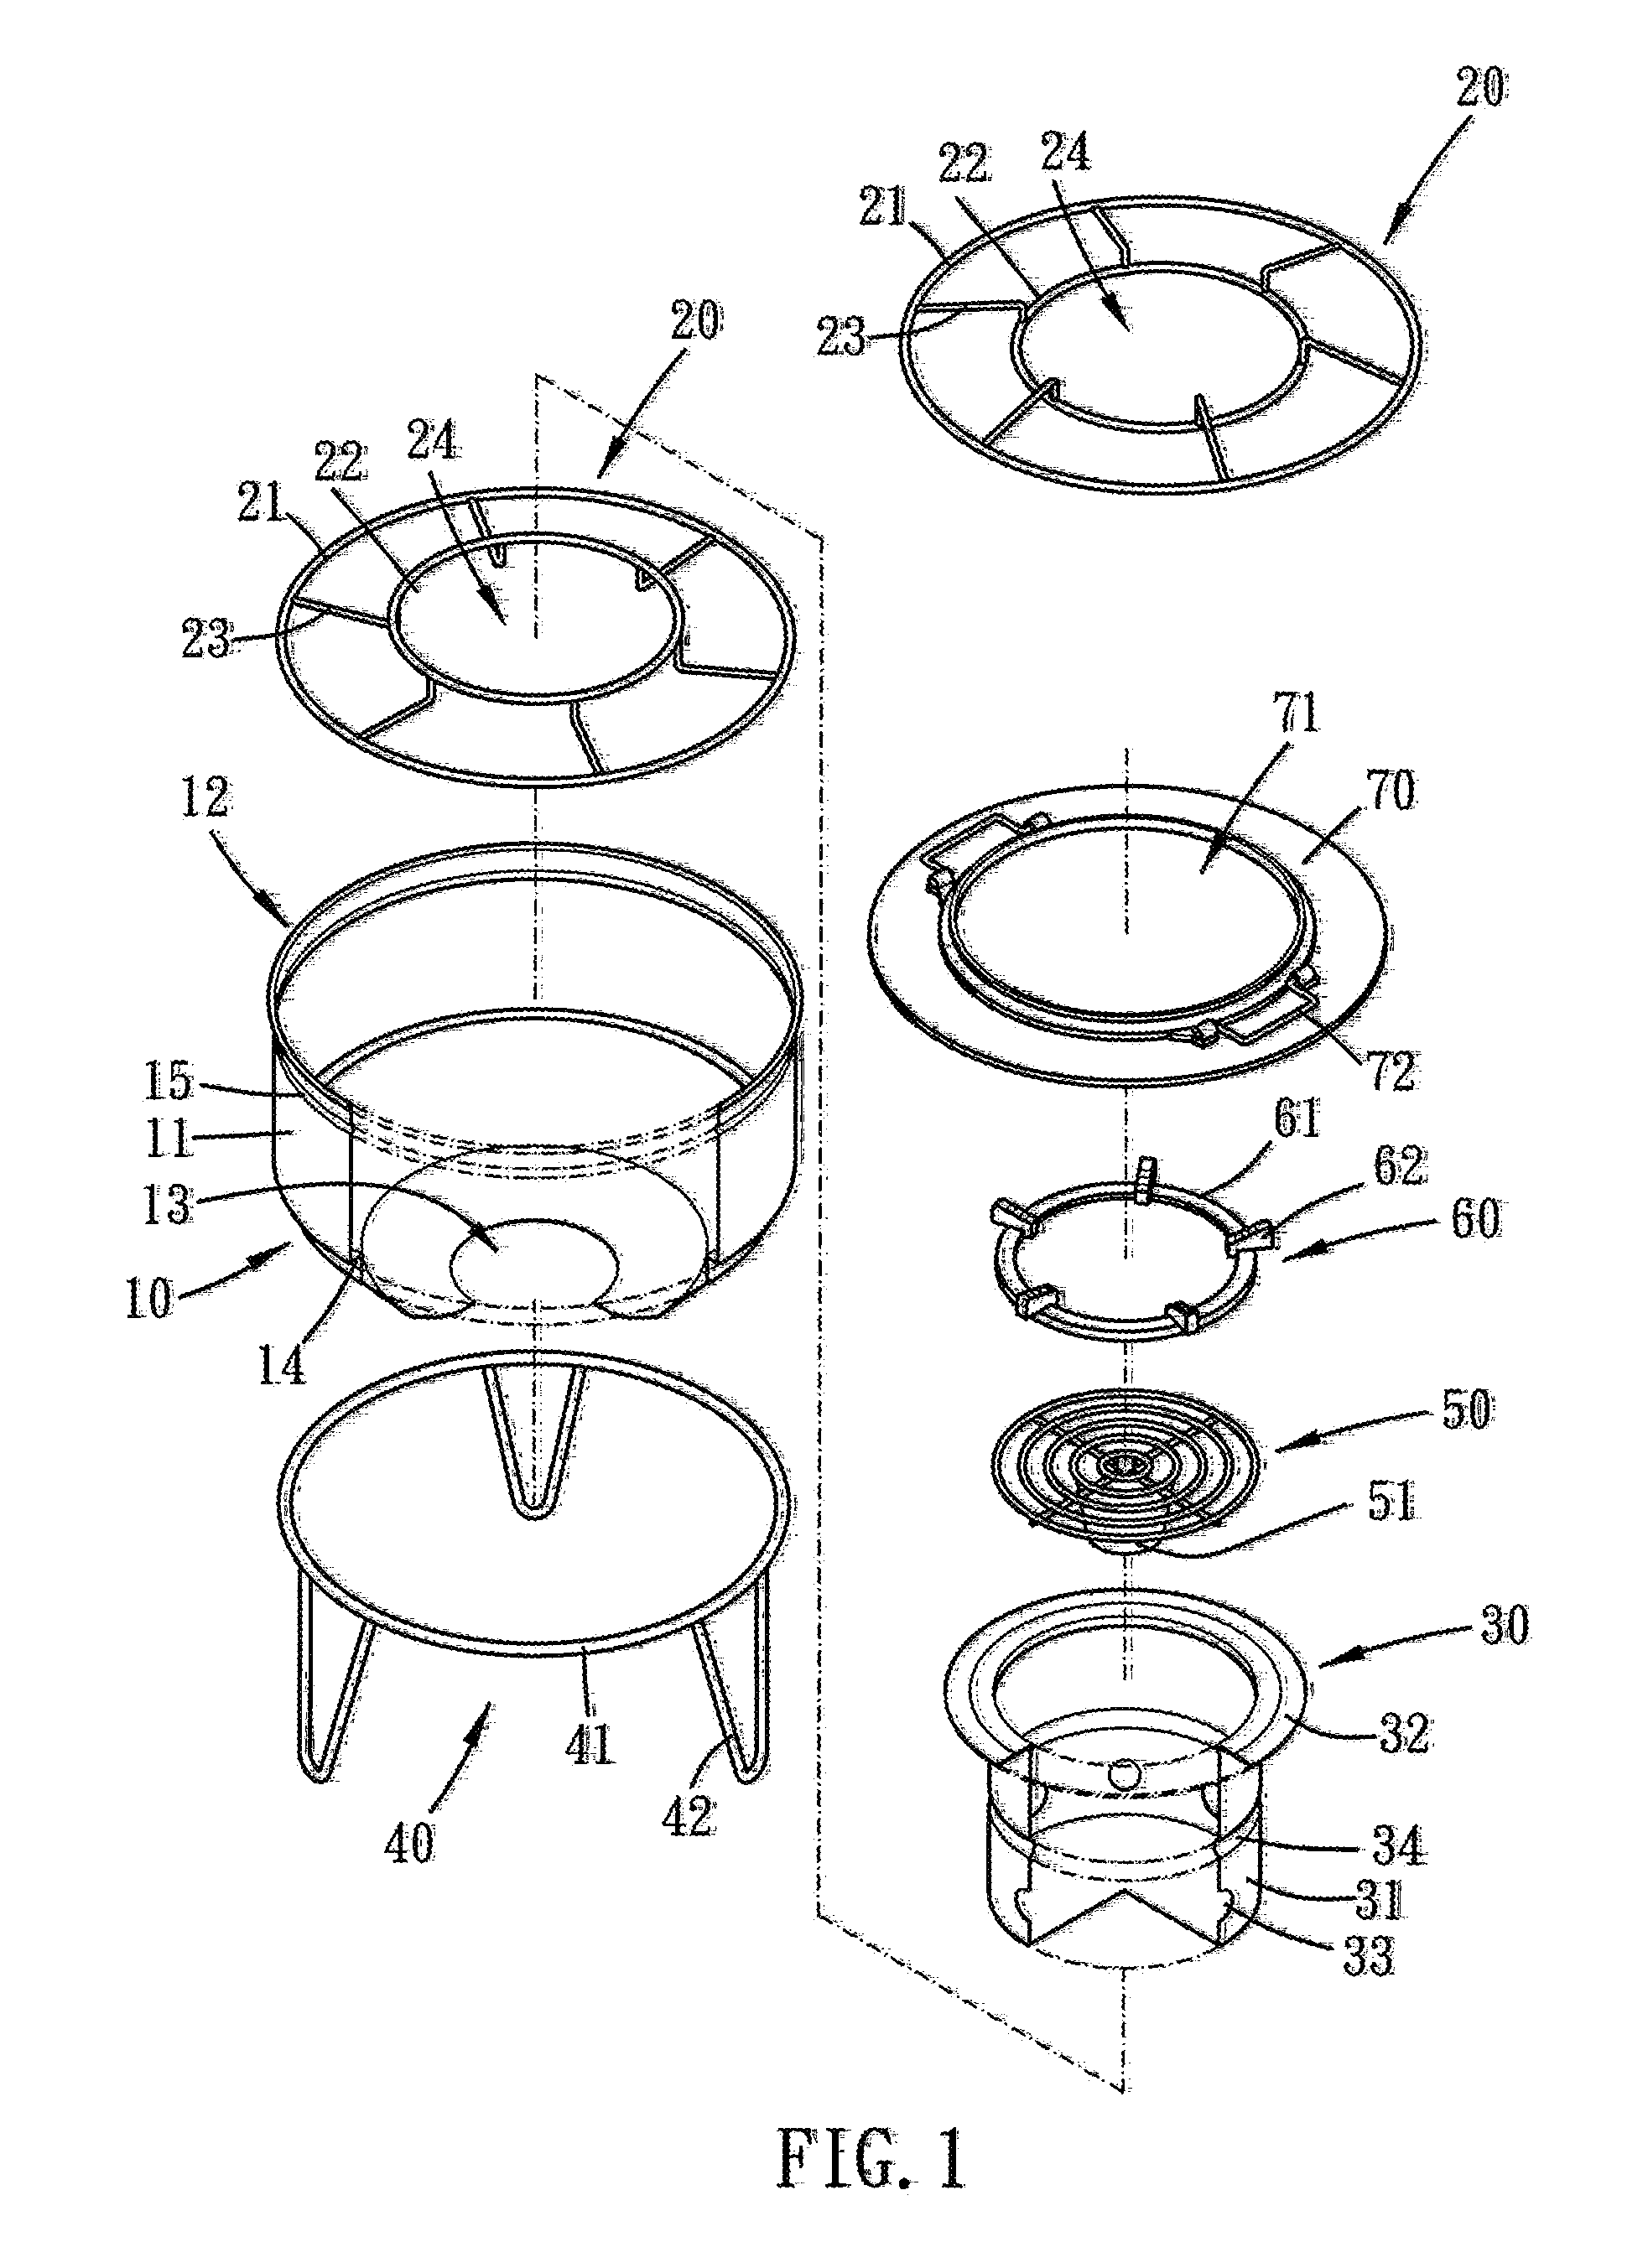 Multi-functional cooking stove